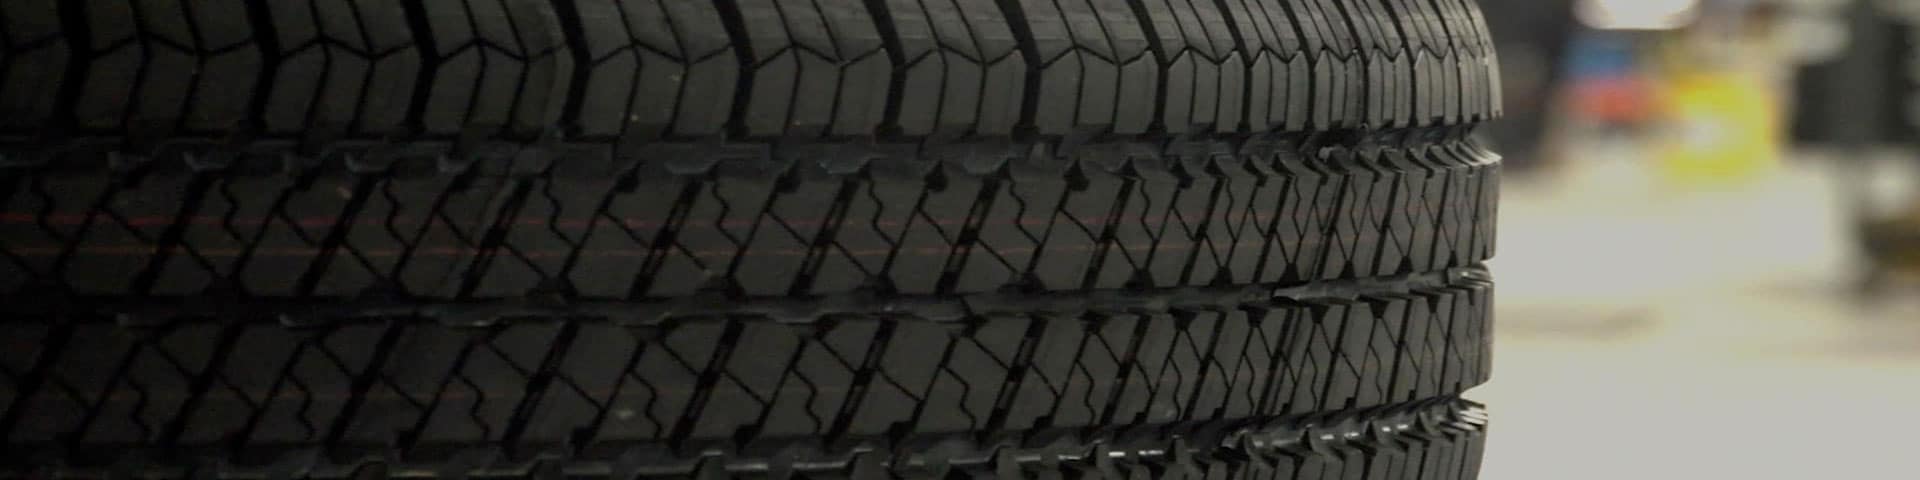 close up view of a tire